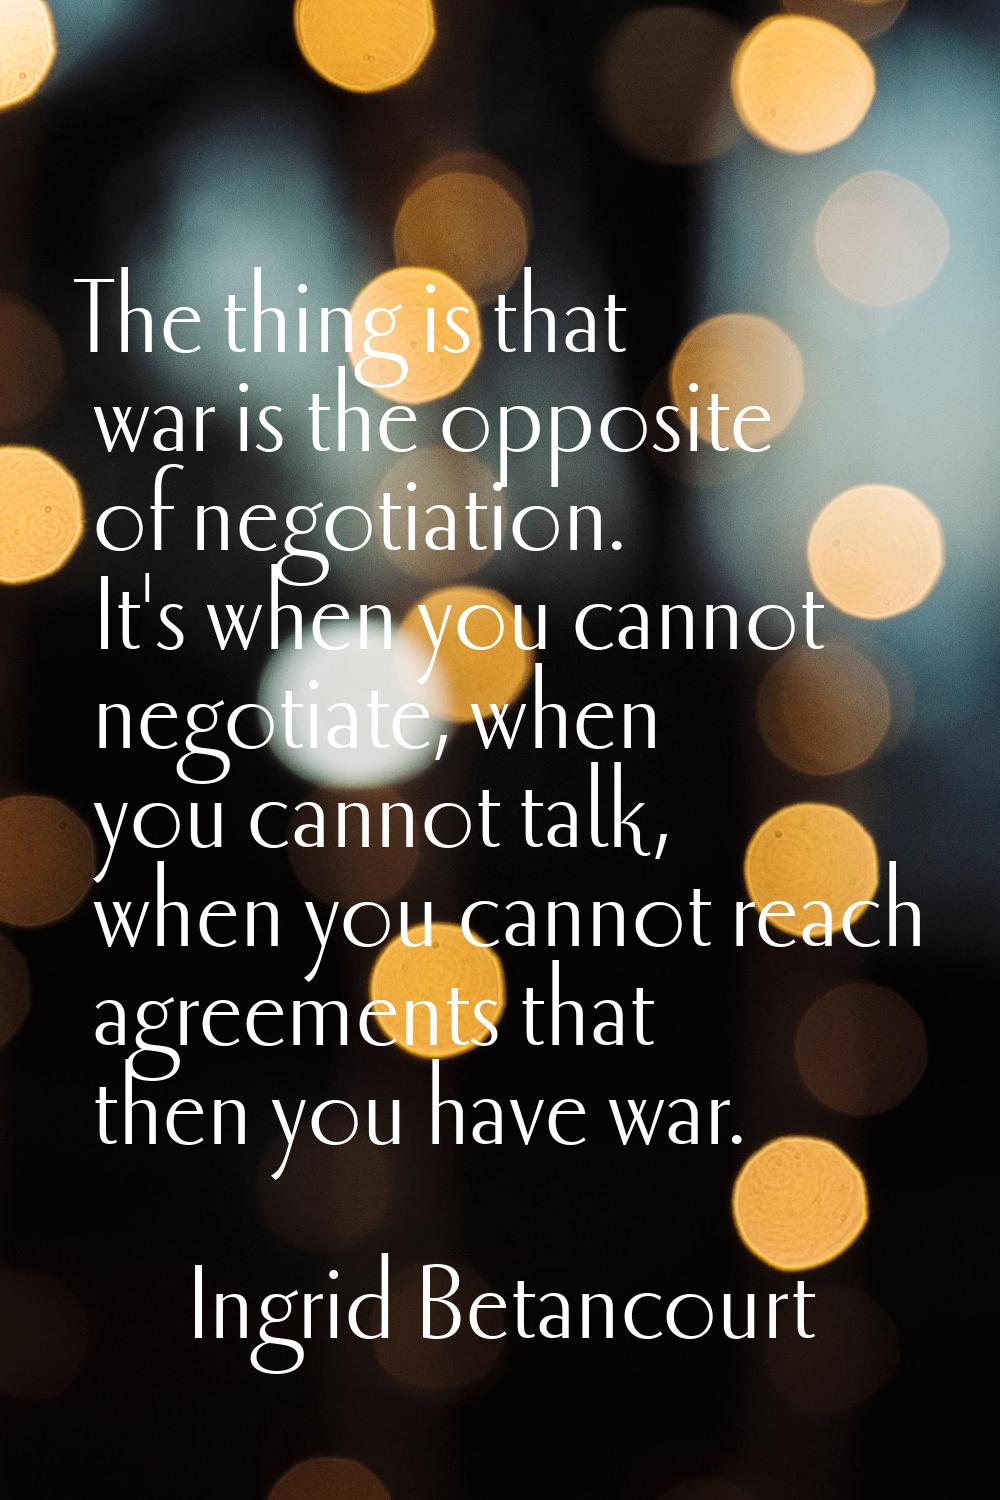 The thing is that war is the opposite of negotiation. It's when you cannot negotiate, when you cann